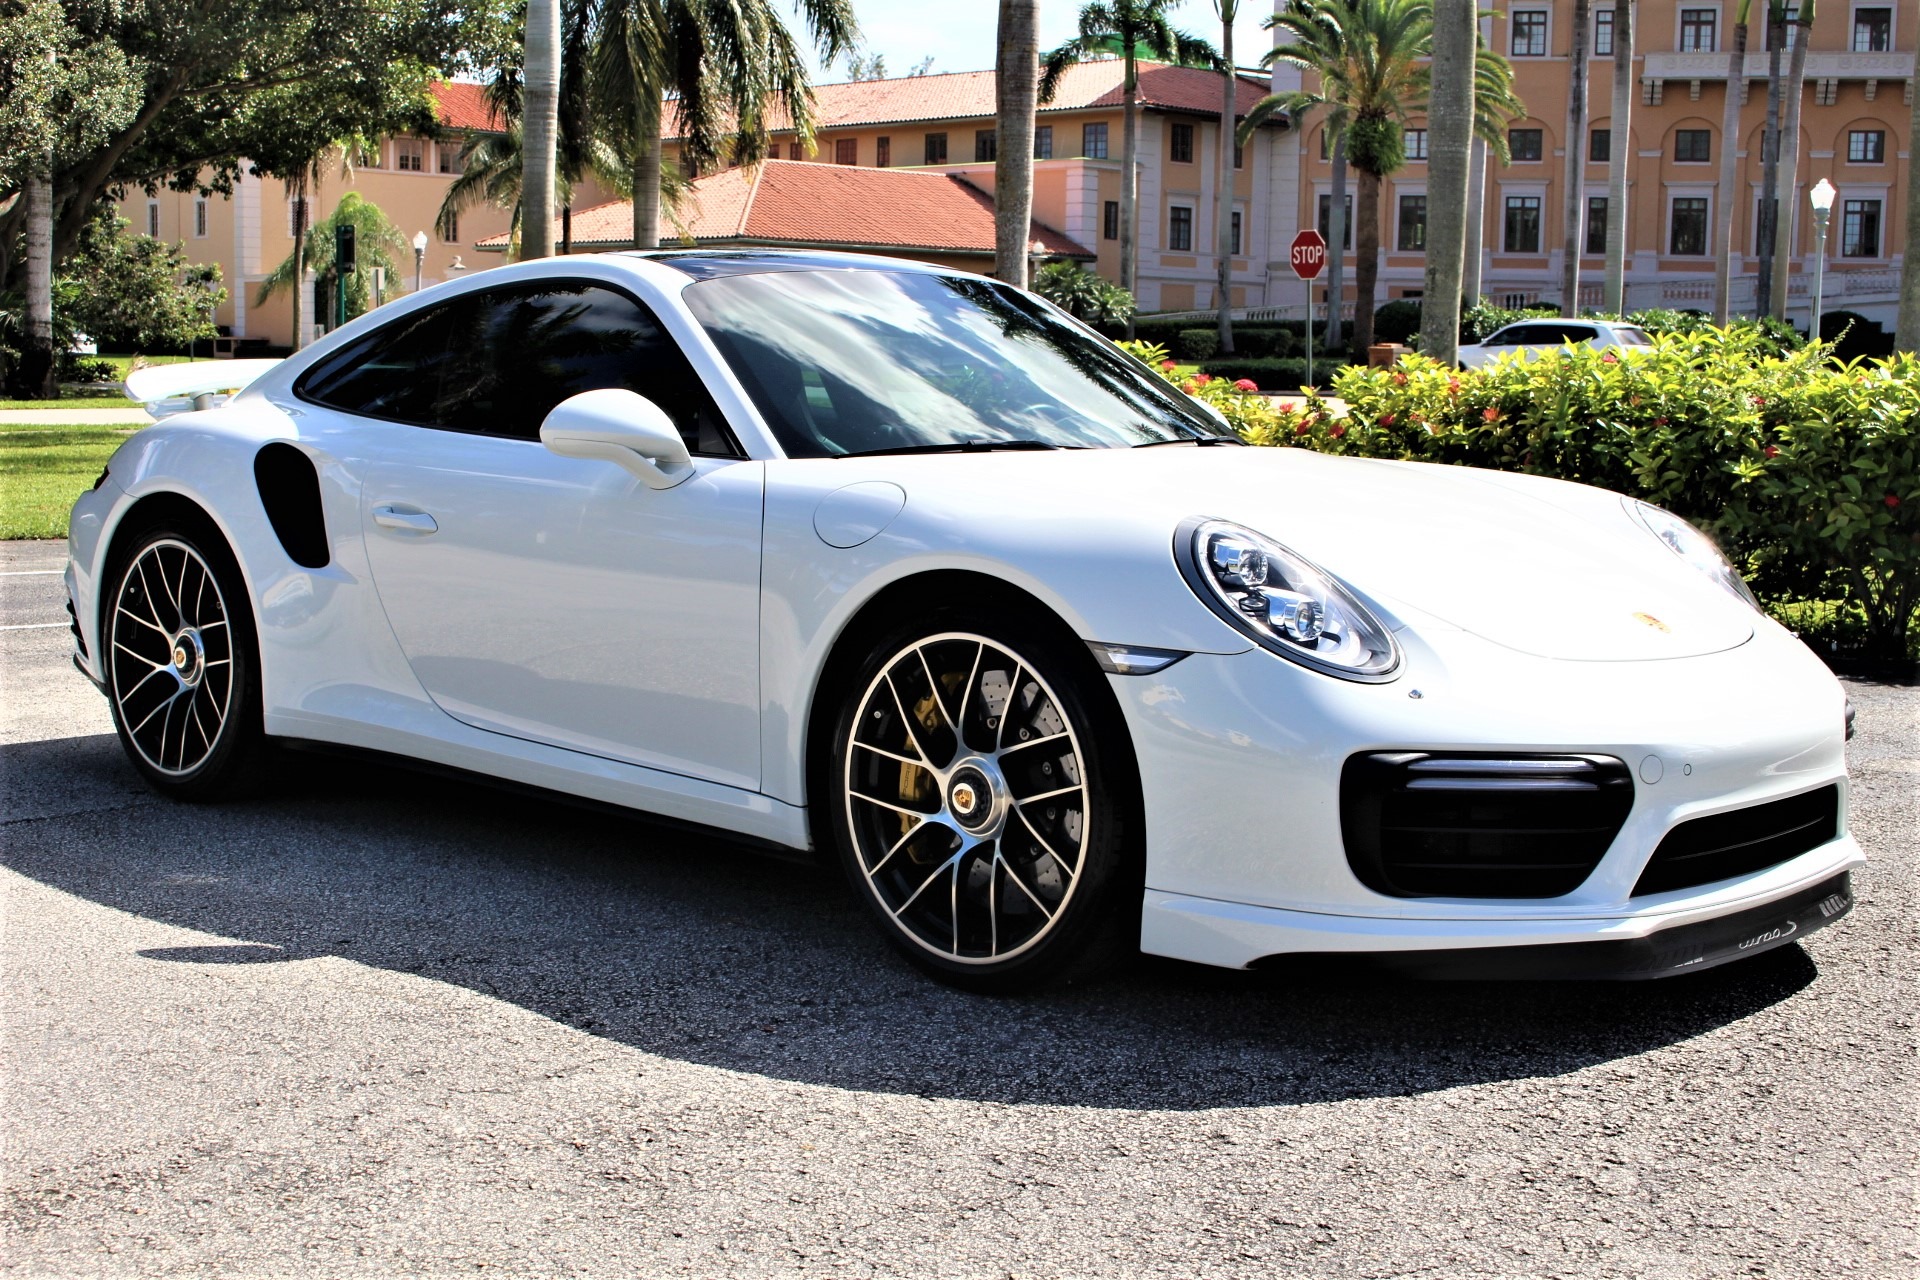 Used 2017 Porsche 911 Turbo S for sale Sold at The Gables Sports Cars in Miami FL 33146 3